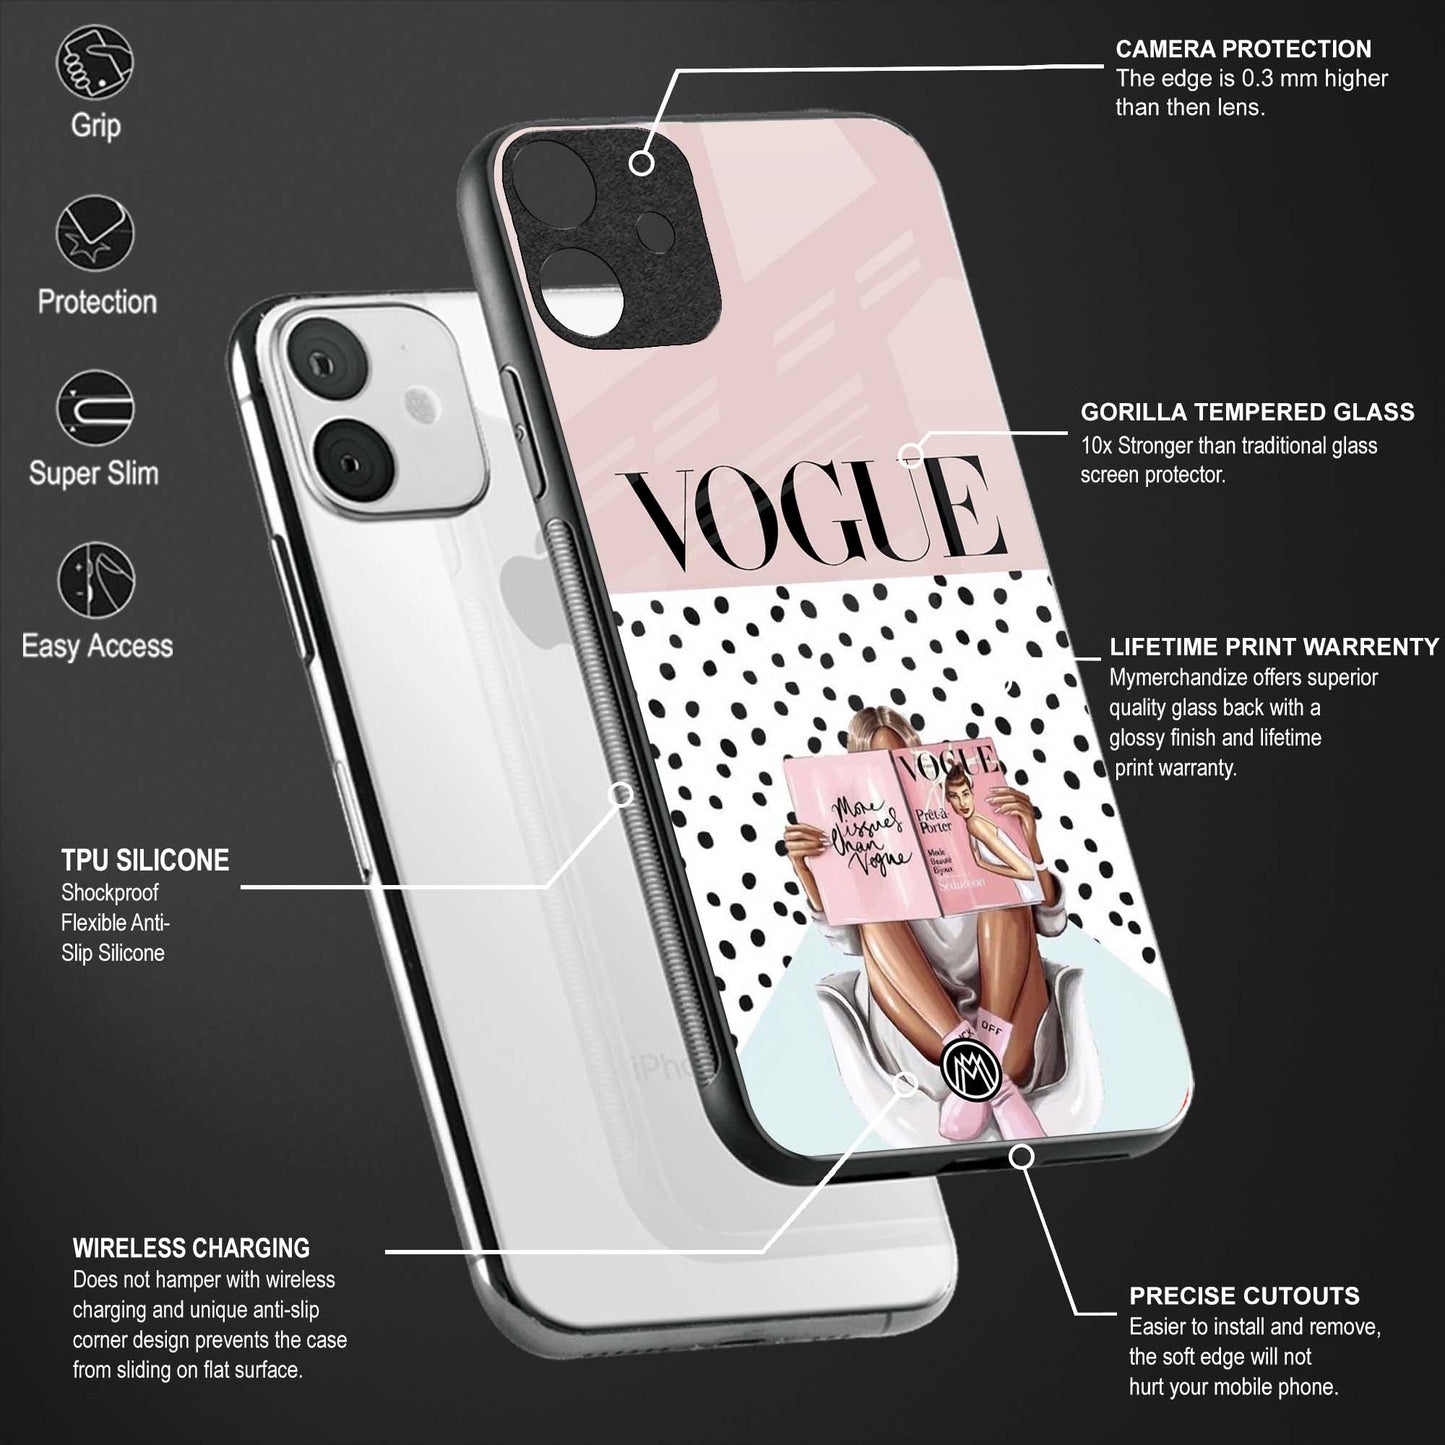 vogue queen glass case for samsung galaxy note 8 image-4